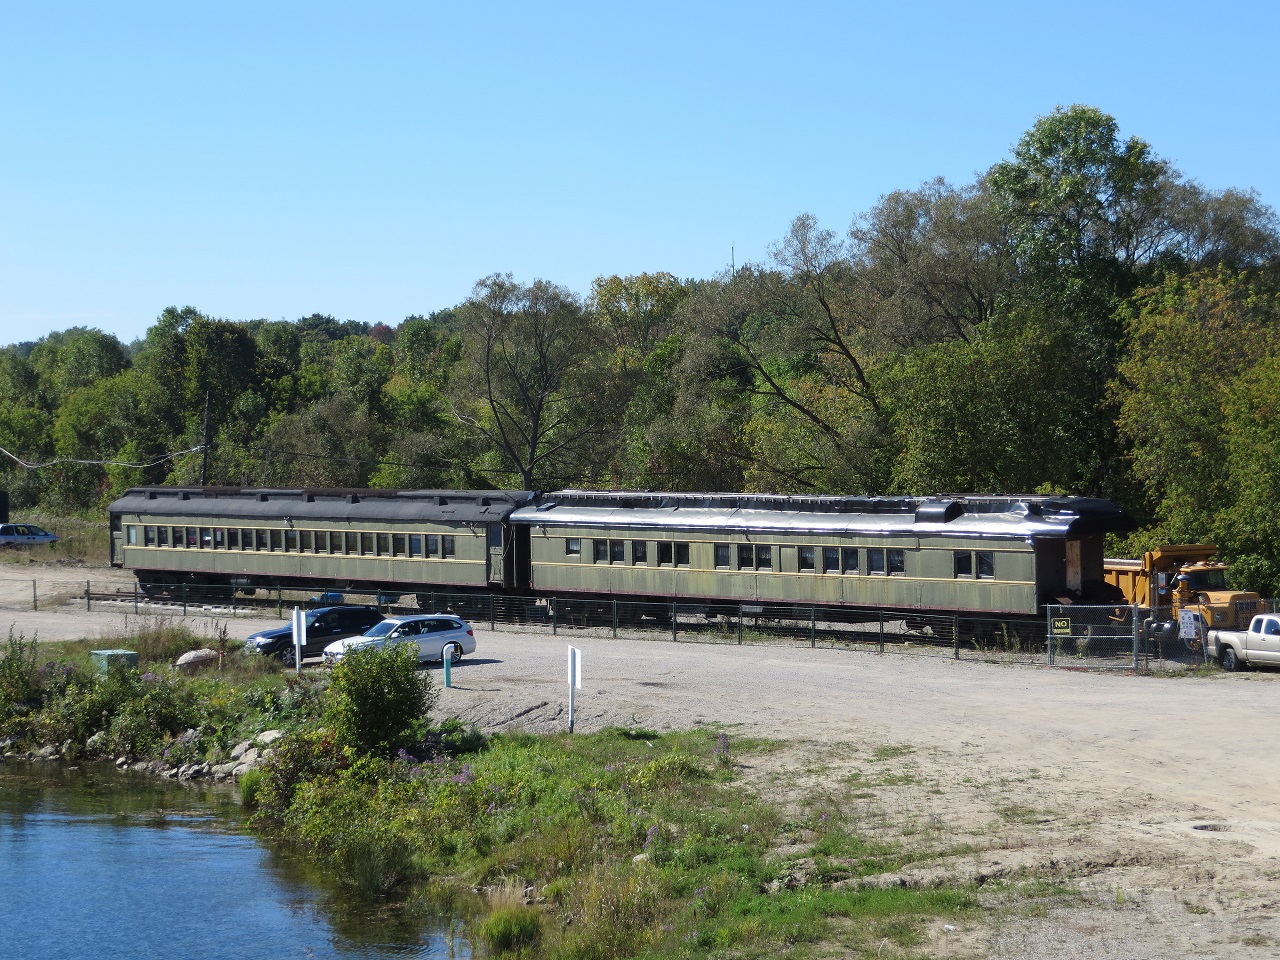 In need of some tlc, former CP coach 1431 and sleeper "Hungerford" await redevelopment at Port McNicoll. The cars were formerly part of the Ossawippi Express restaurant in Orillia. Photo taken from the Deck of the former CPR ship SS Keewatin.